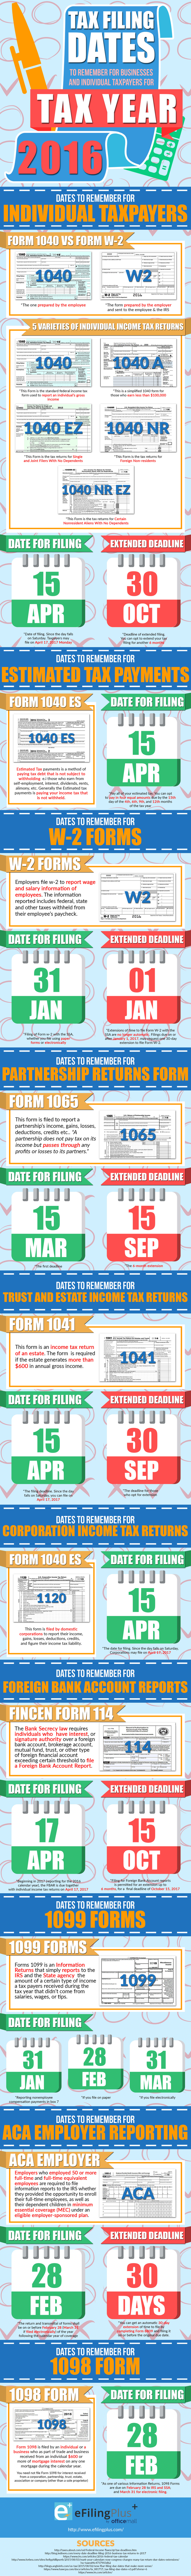 Important Dates to Remember for Tax Year 2016